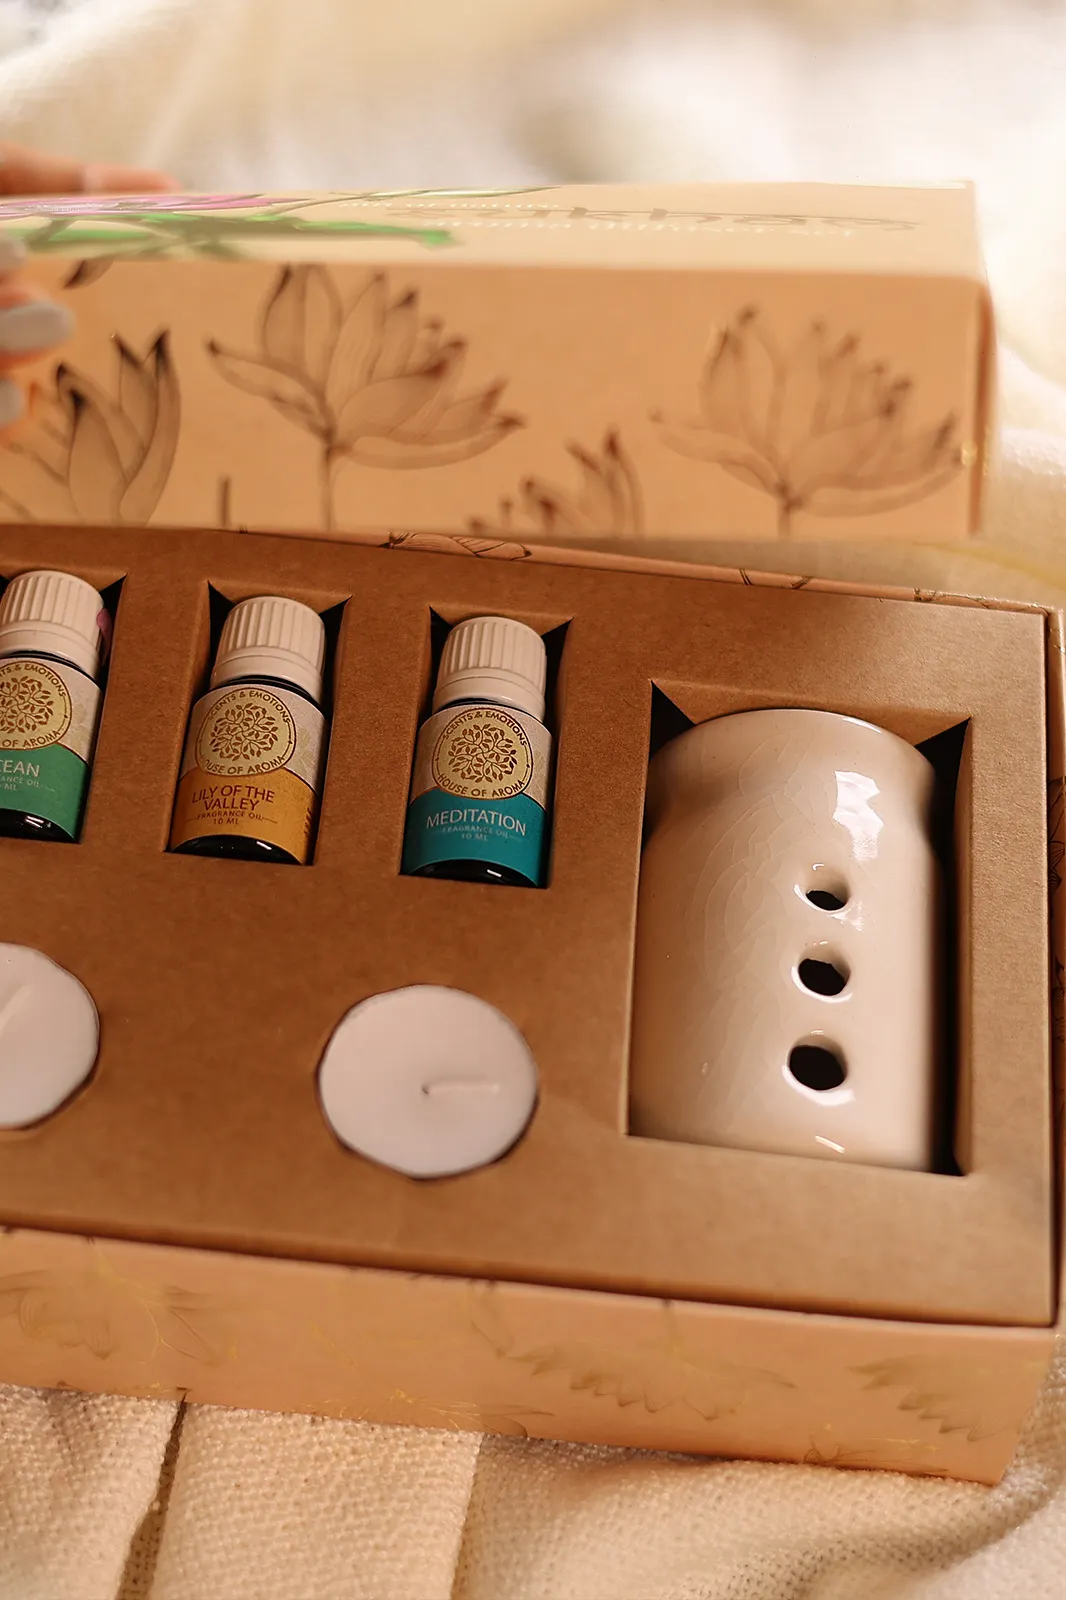 Sukham diffuser gift set with 3 fragrance oils, fragrance oil diffuser, aroma diffuser, home diffuser, ceramic diffuser, diffuser set, House of aroma, diffuser gift set, home fragrance diffuser, room diffuser, aroma diffuser for home, diffuser set with oils, house of aroma